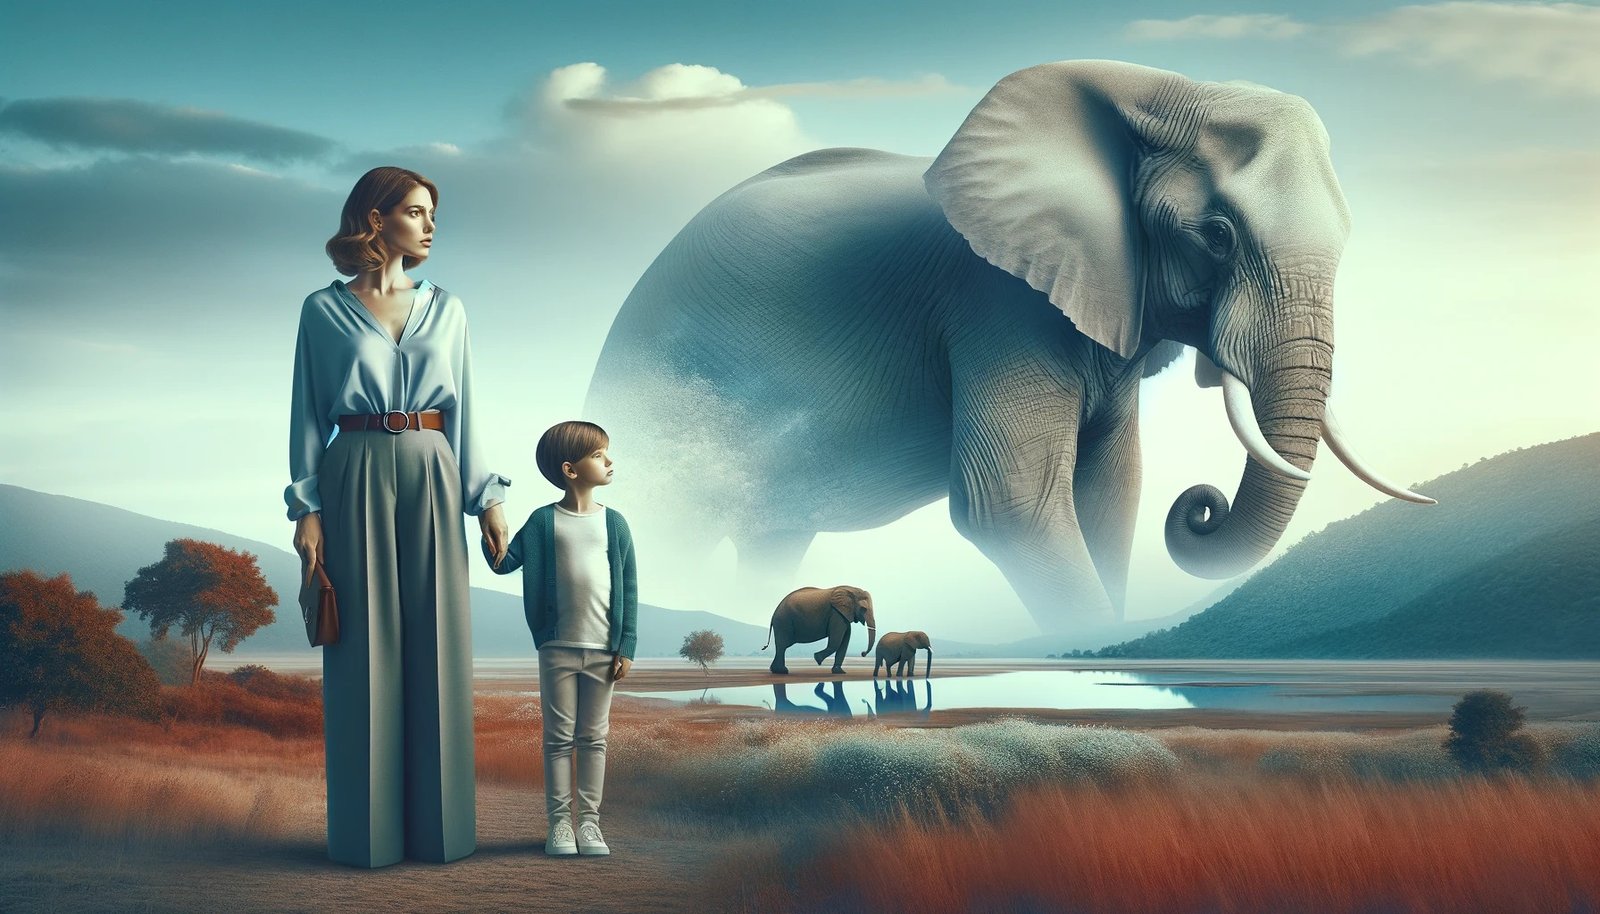 A modern woman standing with her child with elephants in the background.